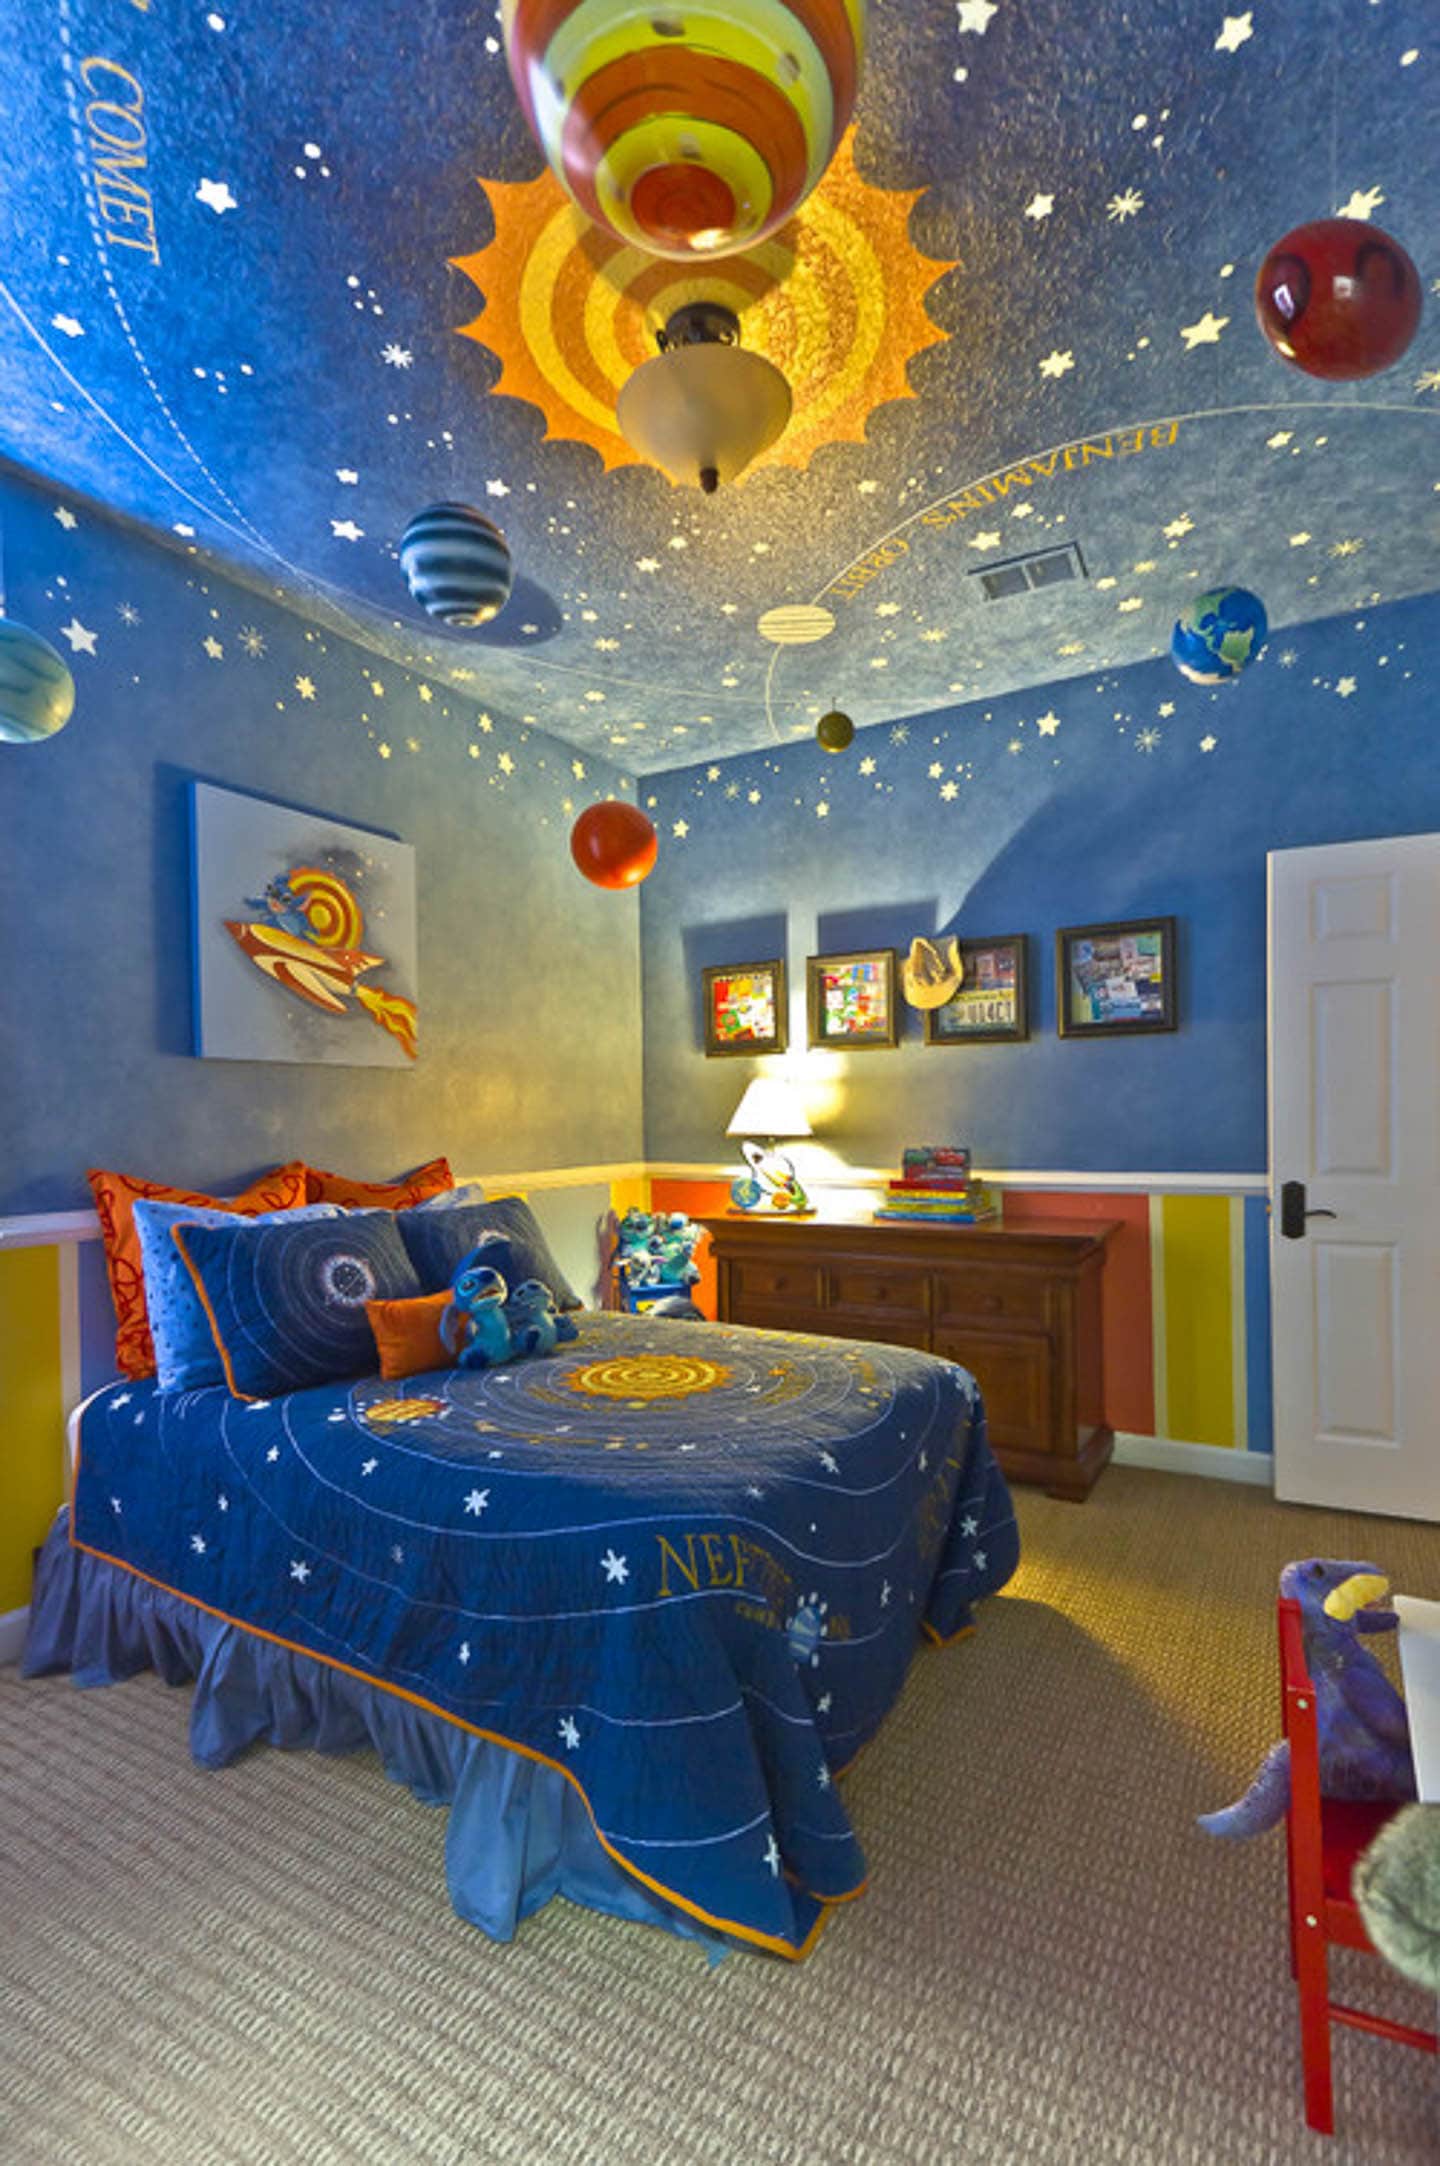 Child's room with blue ceiling and walls painted with the solar system